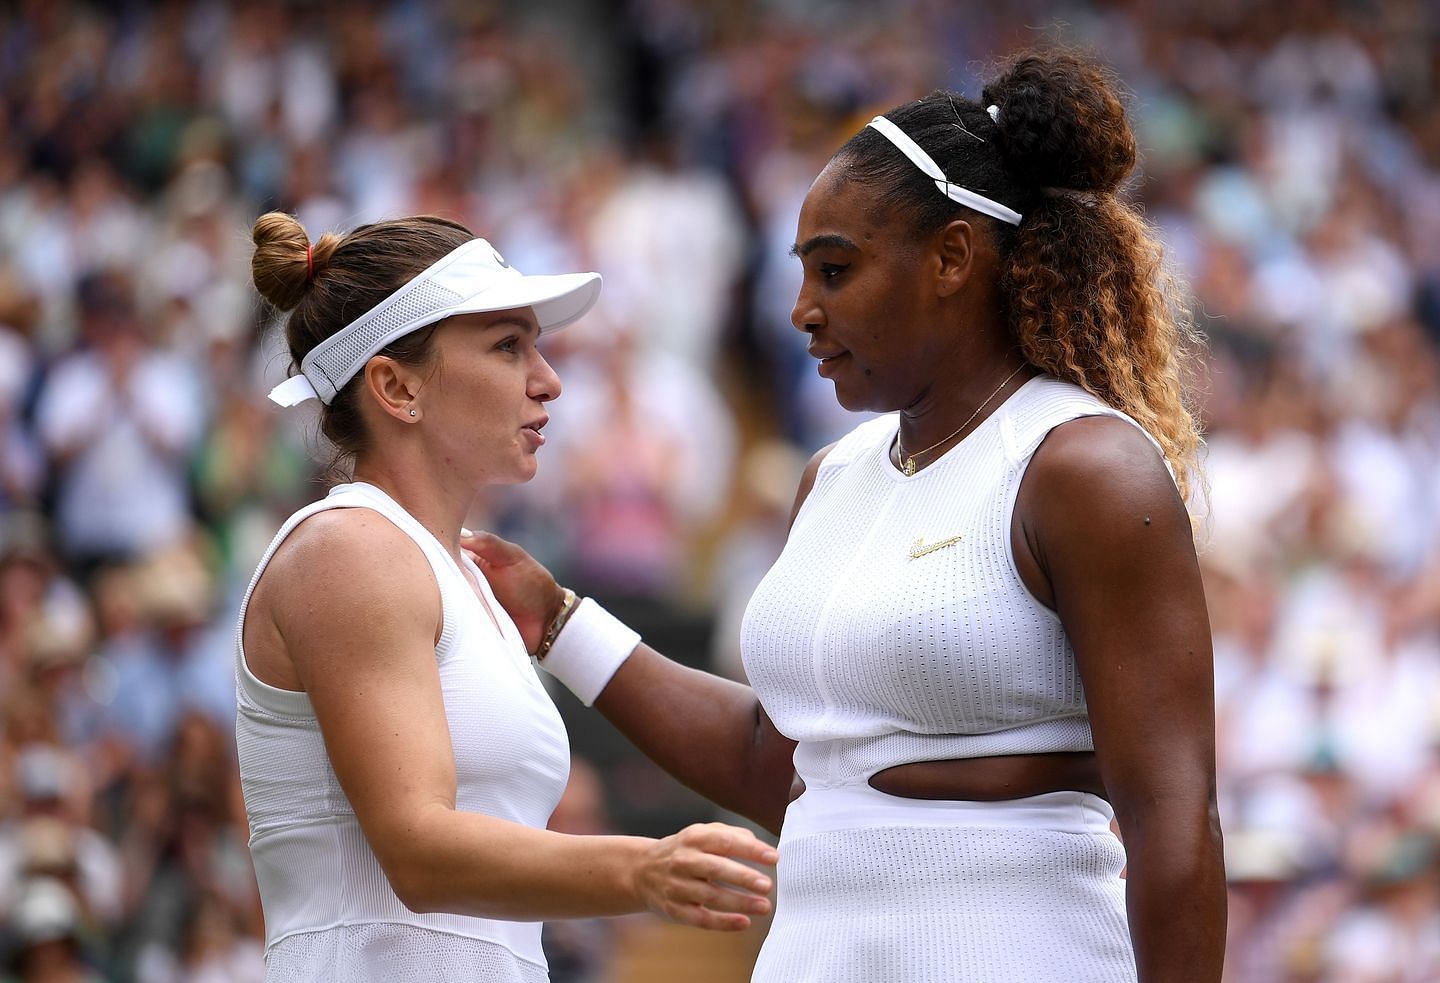 Serena Williams and Simona Halep embrace each other after the 2019 Wimbledon final